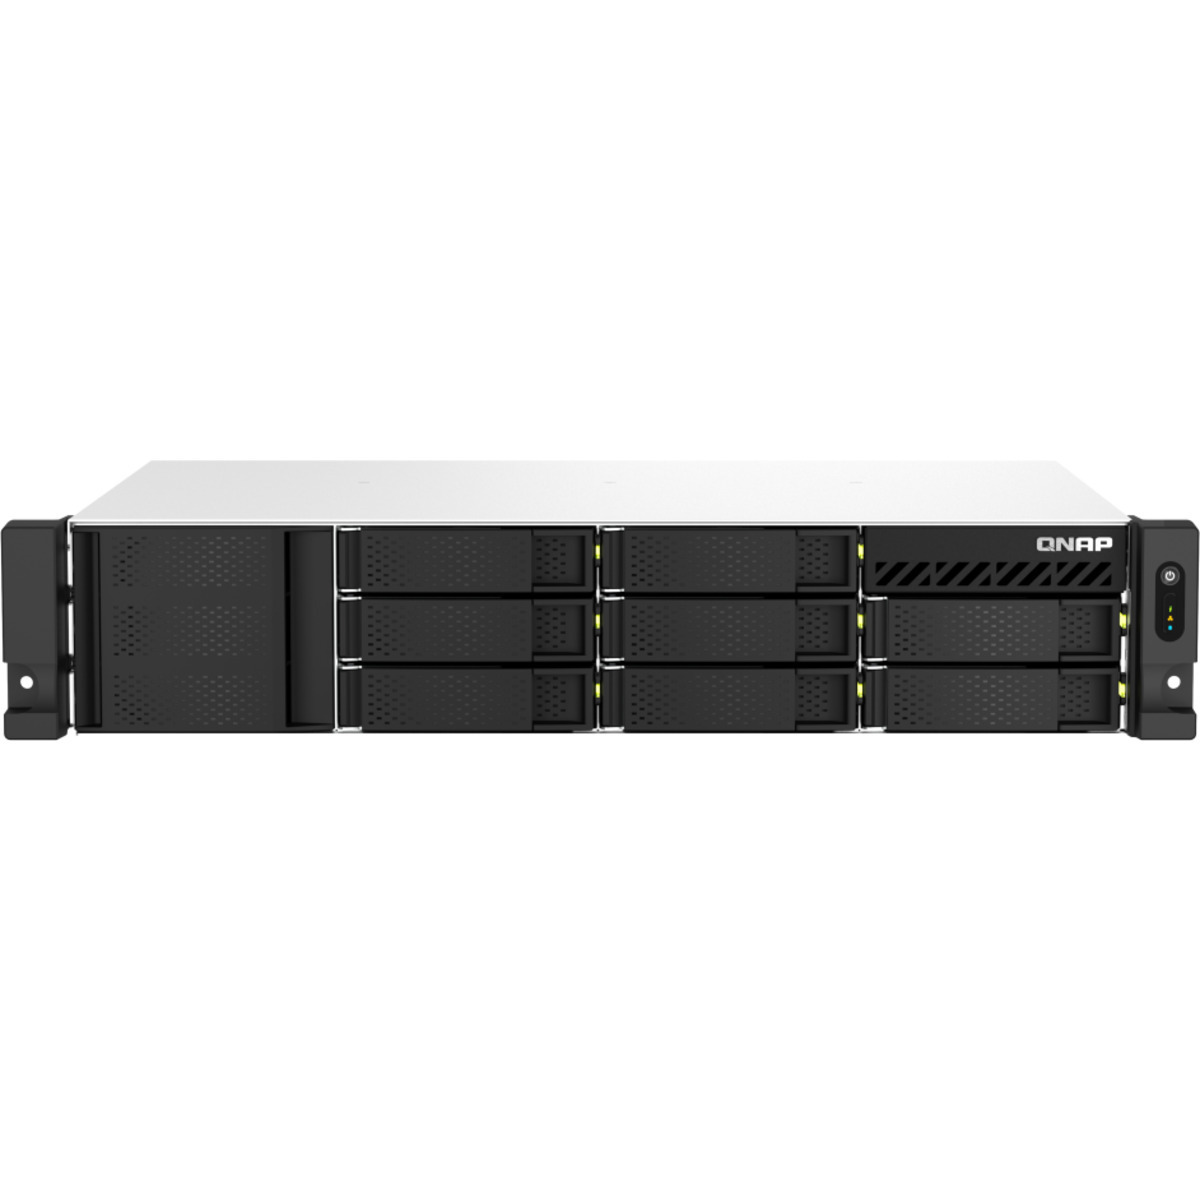 QNAP TS-873AeU 56tb 8-Bay RackMount Multimedia / Power User / Business NAS - Network Attached Storage Device 4x14tb Western Digital Ultrastar DC HC530 WUH721414ALE6L4 3.5 7200rpm SATA 6Gb/s HDD ENTERPRISE Class Drives Installed - Burn-In Tested - FREE RAM UPGRADE TS-873AeU